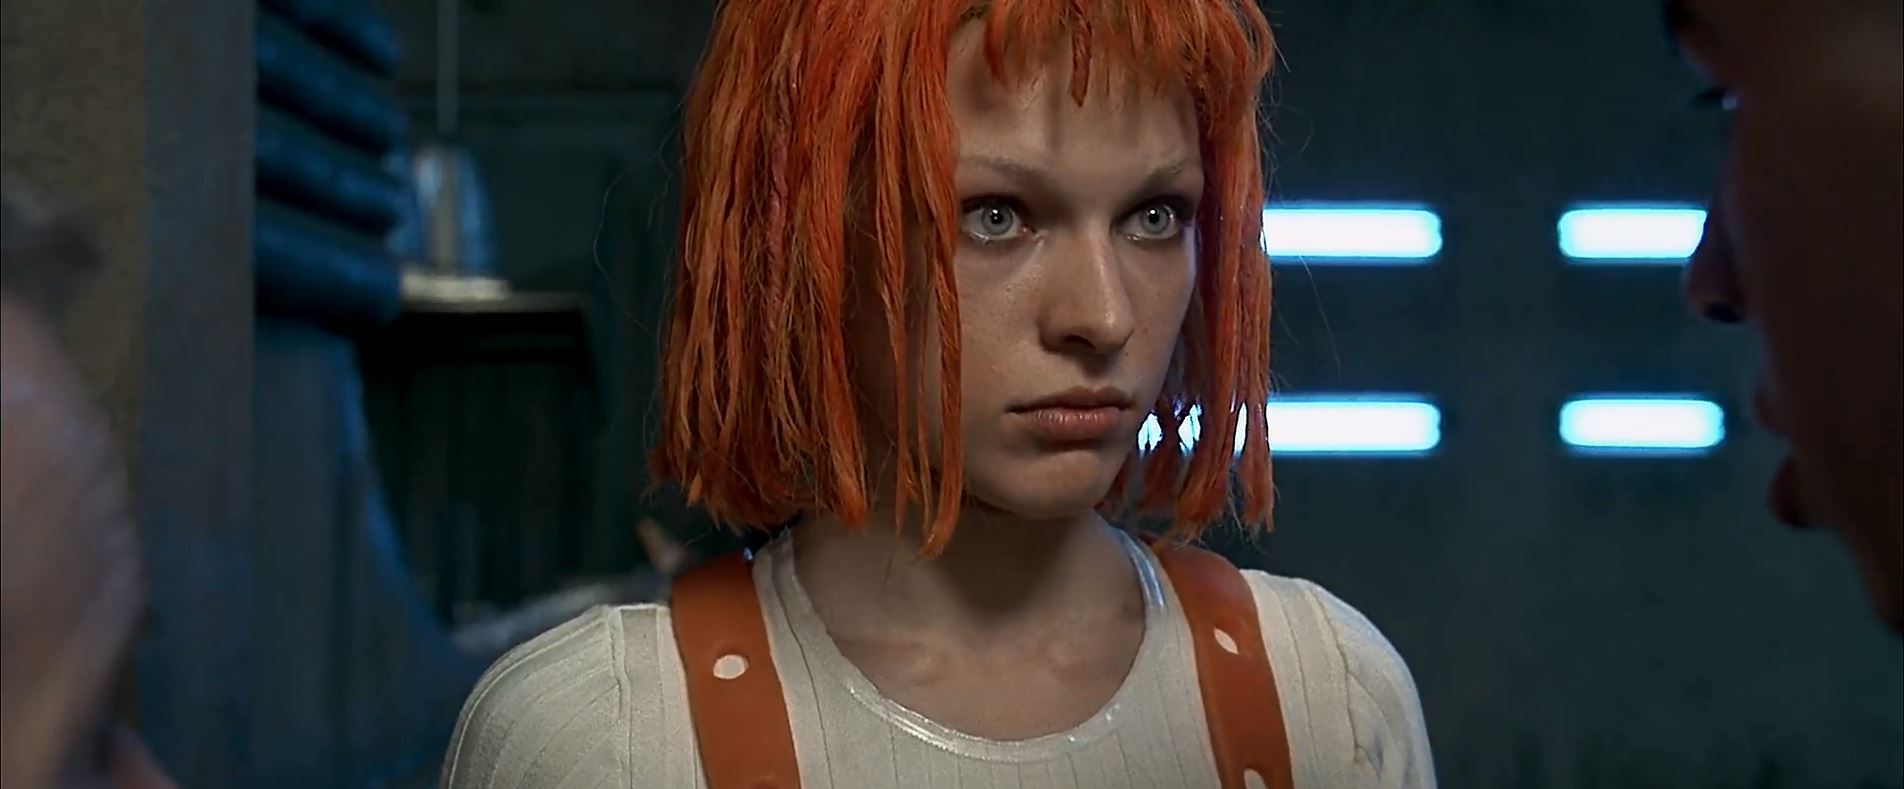 Milla Jovovich as Leeloo with orange hair - The Fifth Element